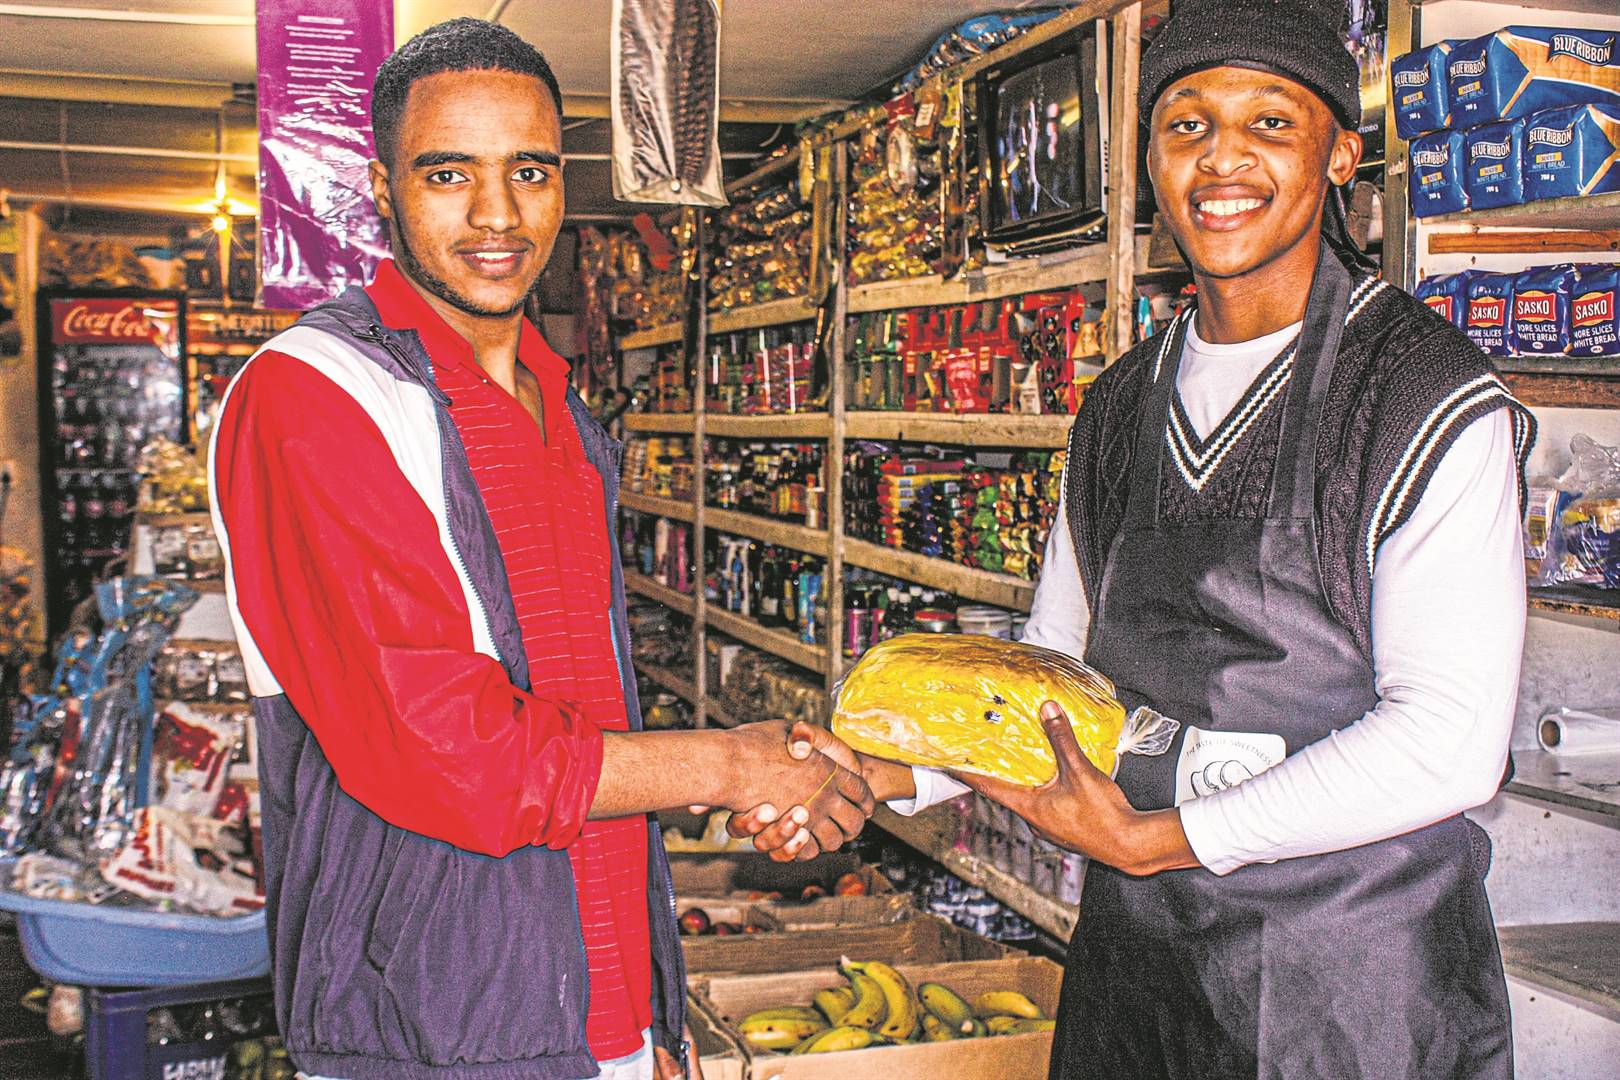 Mandlenkosi Bill (right) from Isonka delivering his freshly baked bread to one of his customers in Despatch. 